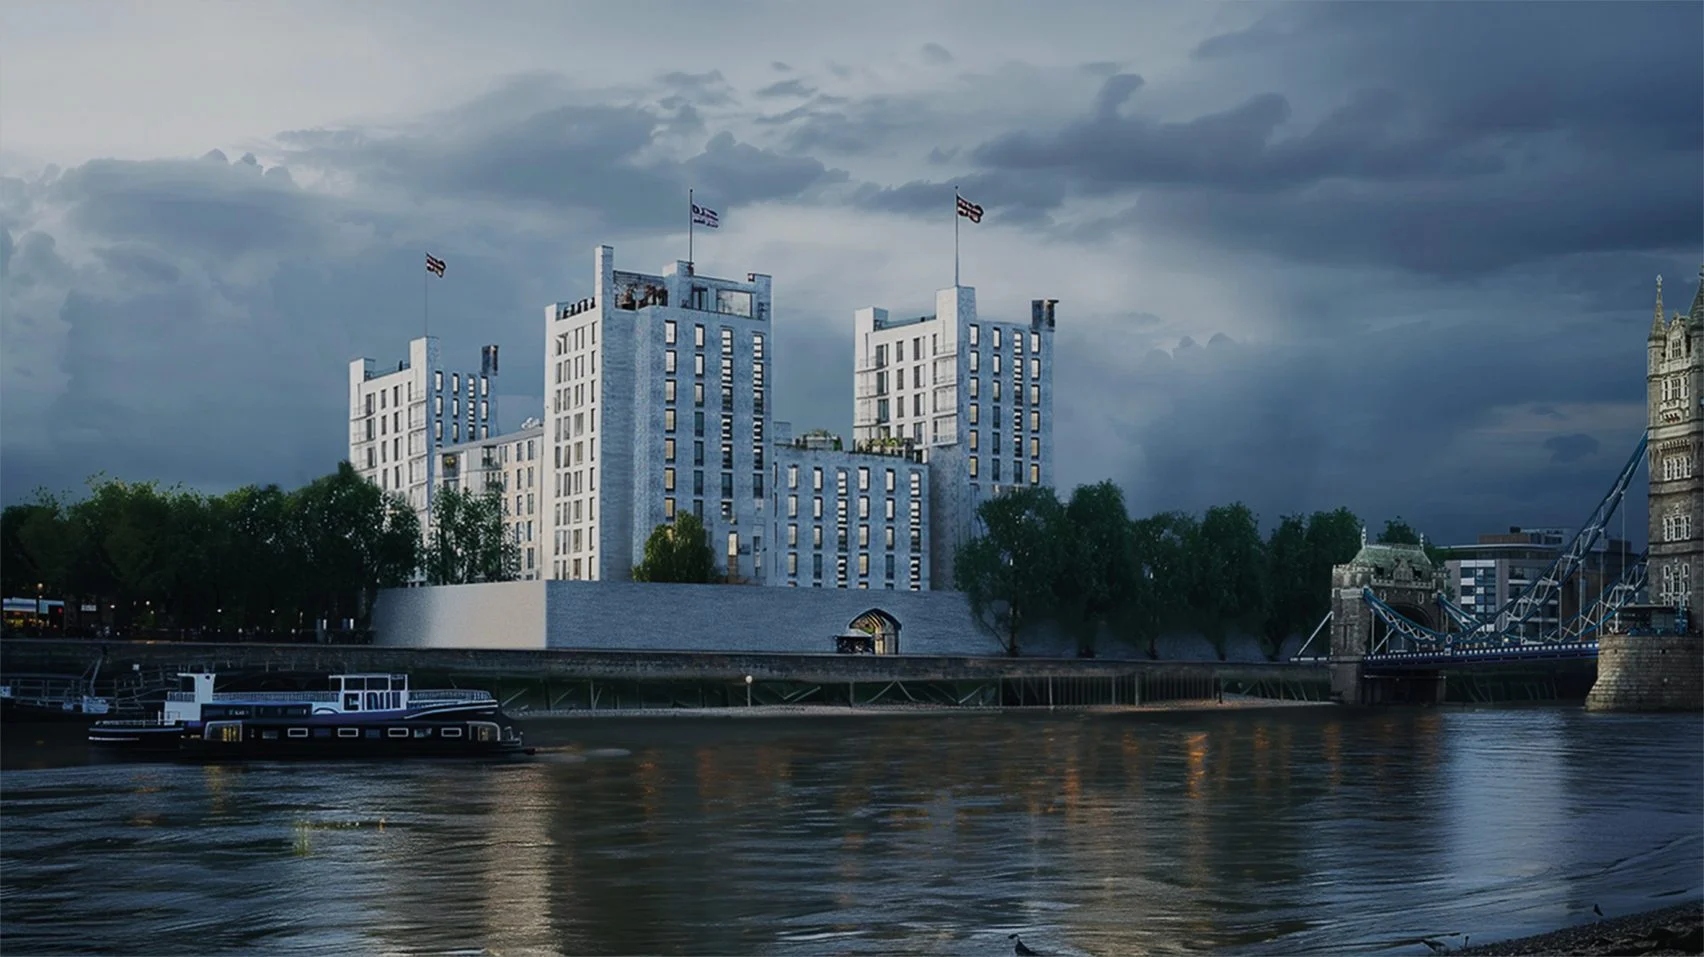 Tower of London reimagined in modernist style Heatherwick campaign